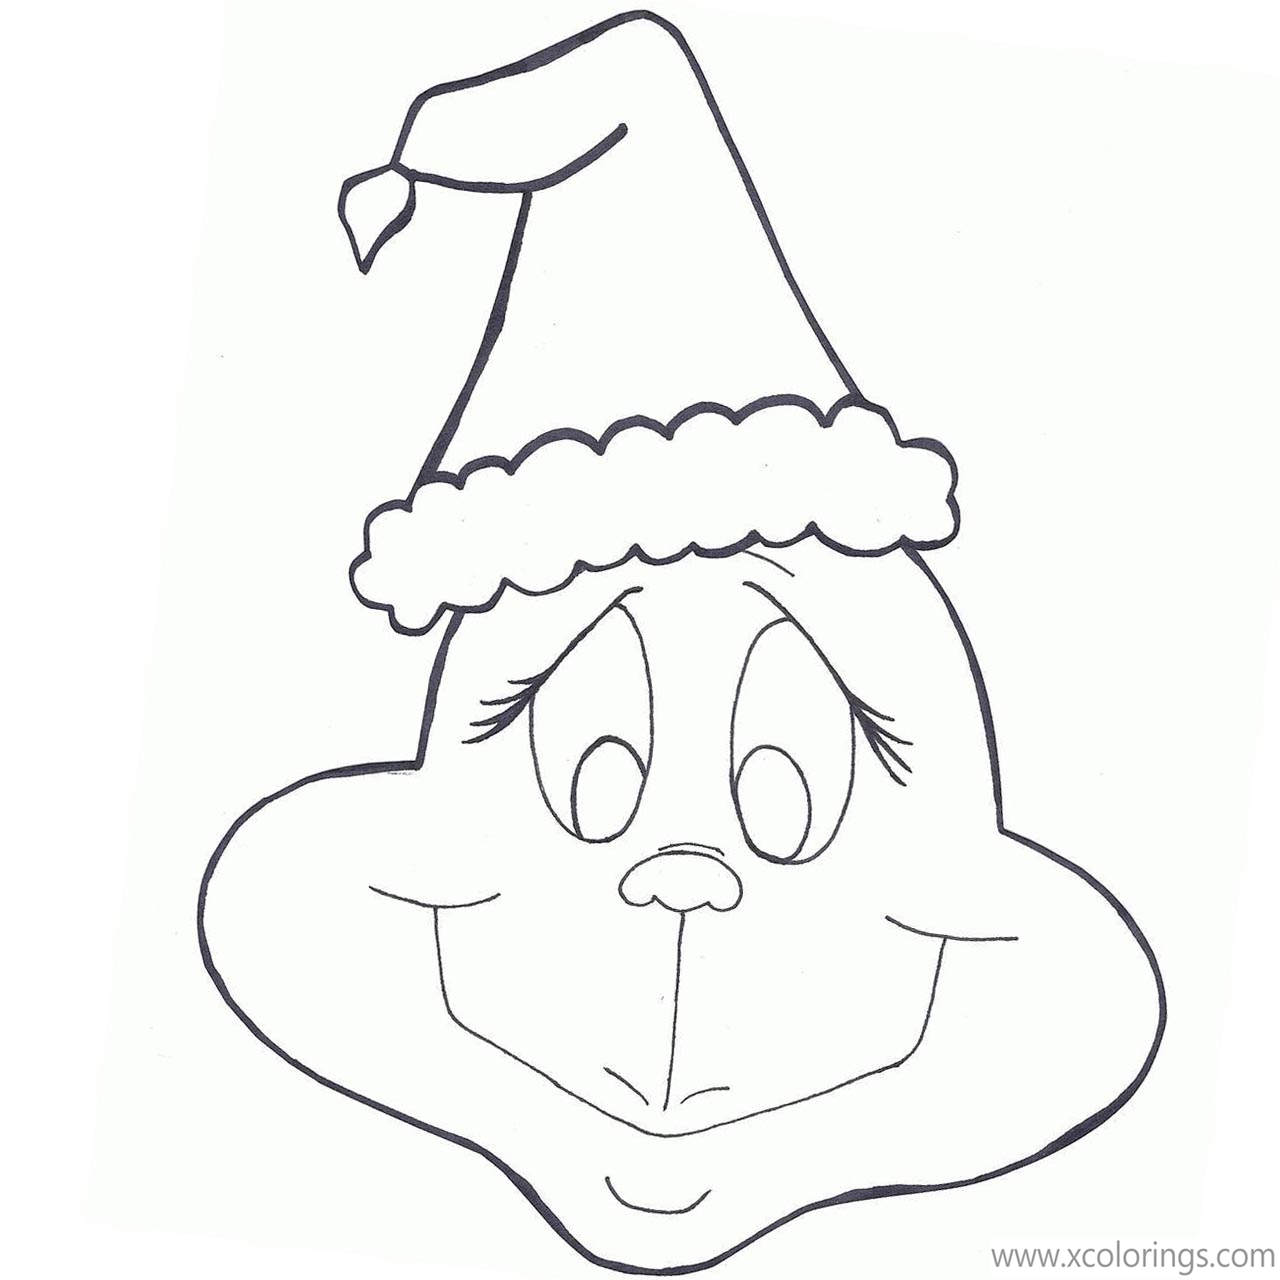 Free Face of Grinch Coloring Pages printable